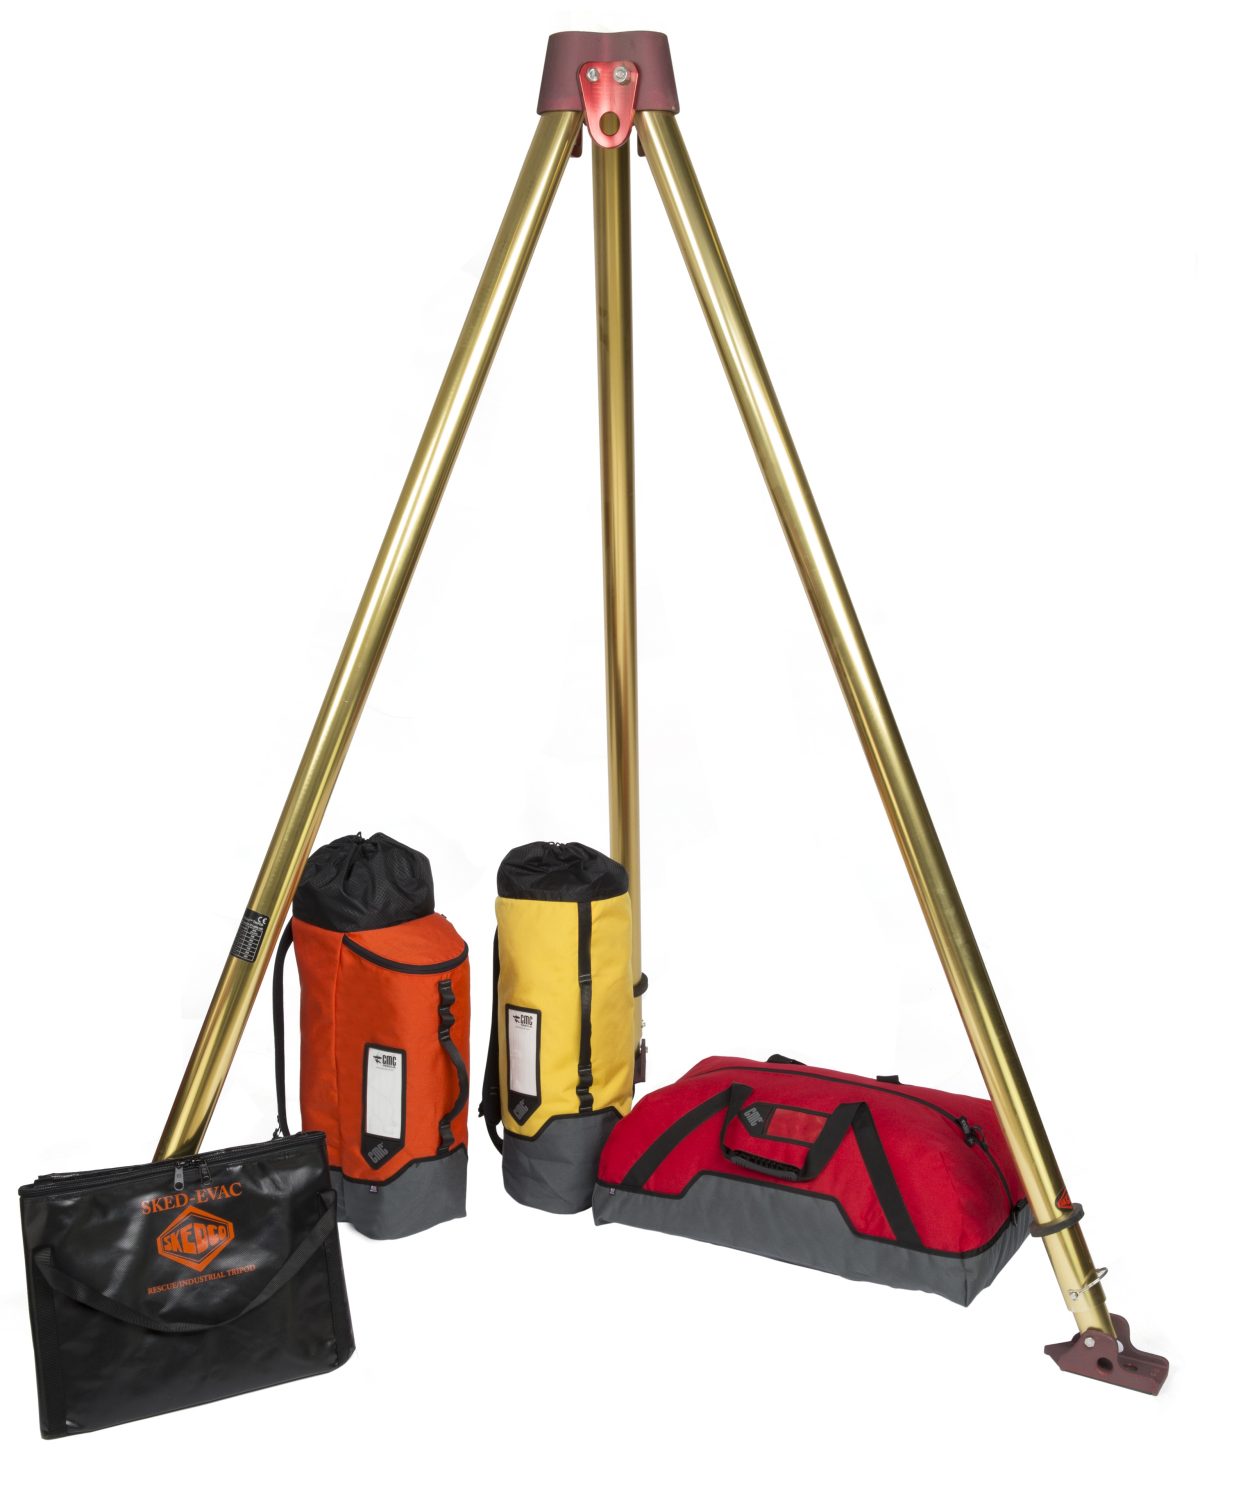 CONFINED SPACE ENTRY KIT